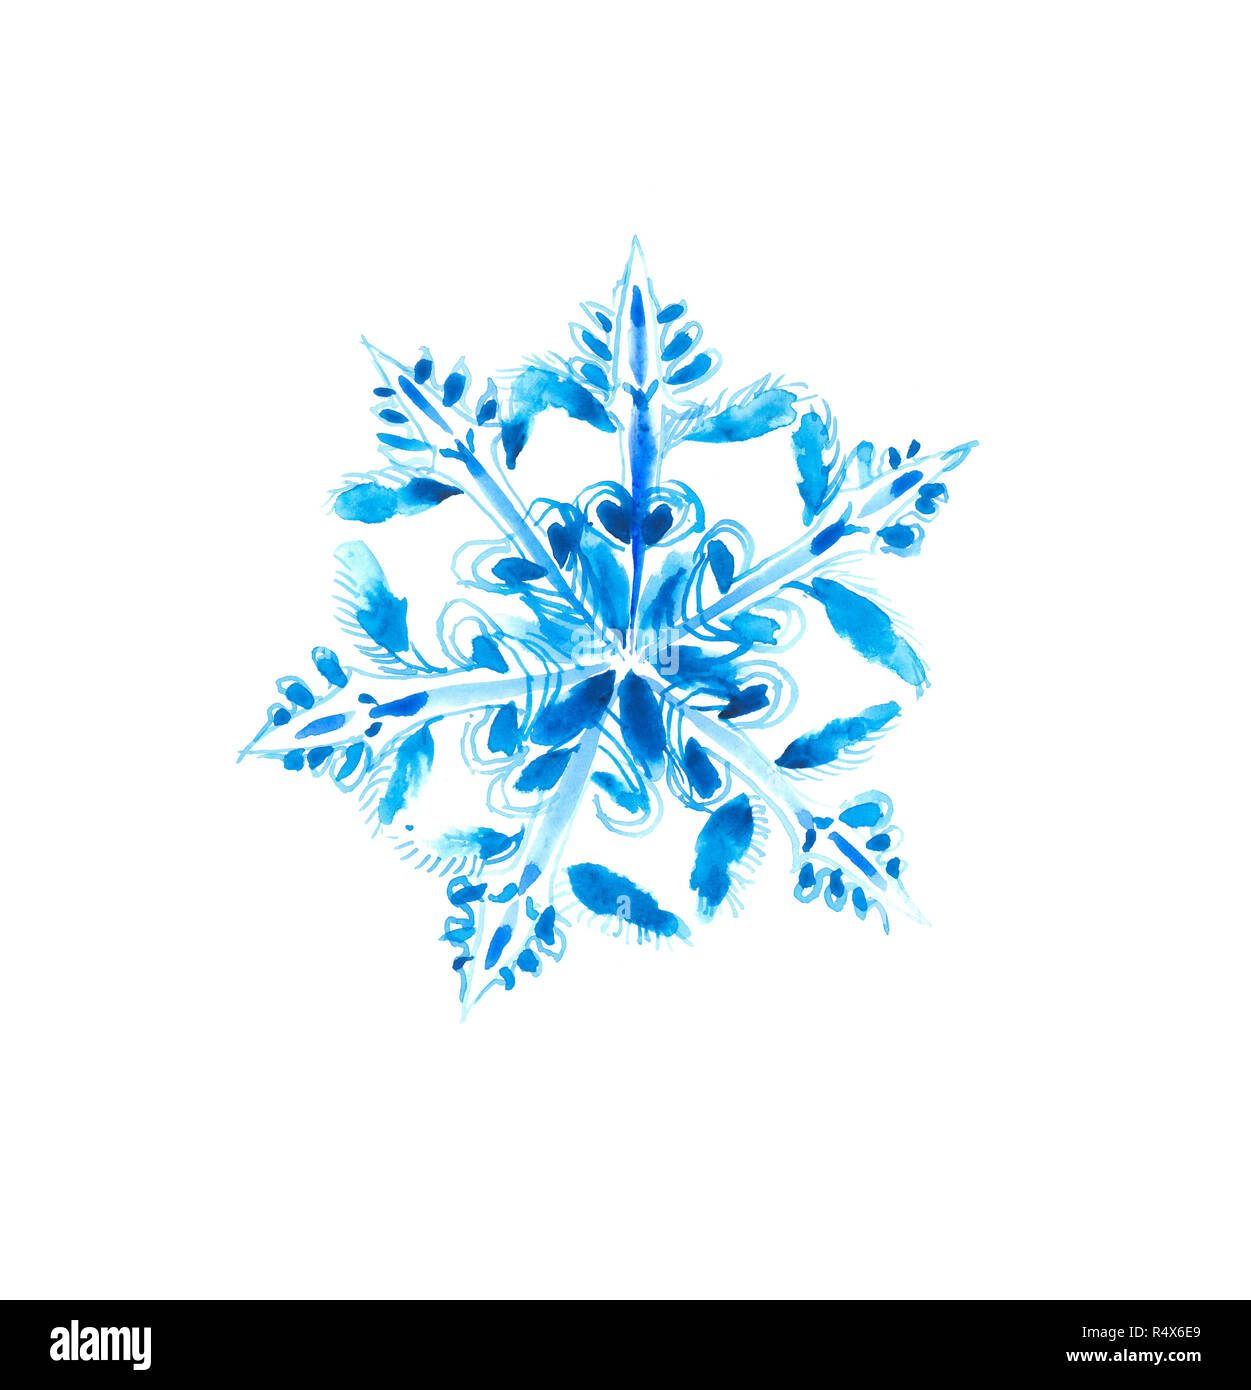 Beautiful snowflake. Waiting for the first snow. Pattern on the glass. Watercolor background. Stock Photo